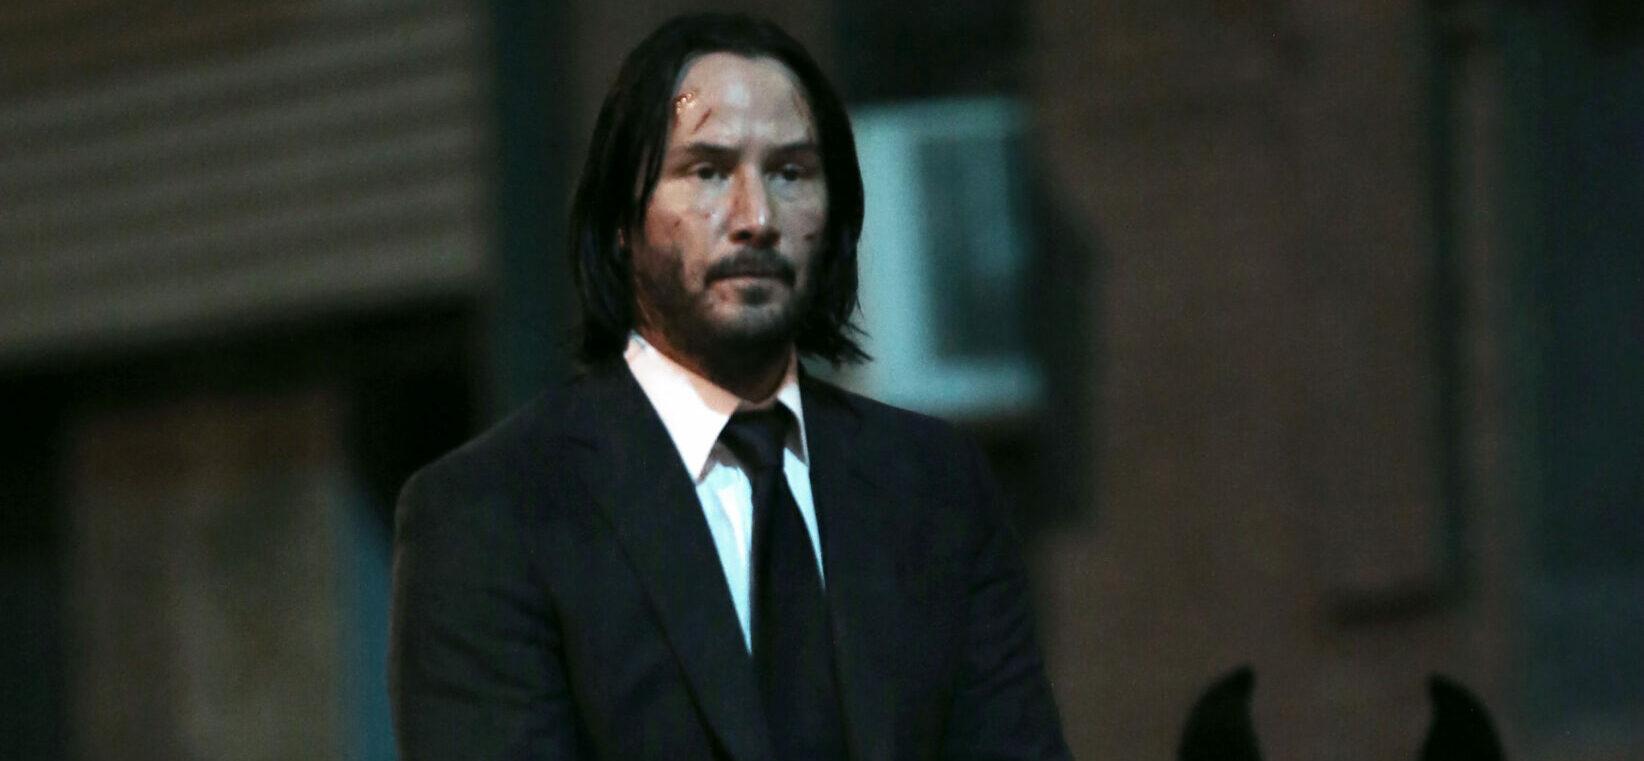 John Wick 4: Chapter 4' Release Date Delayed to 2023 – The